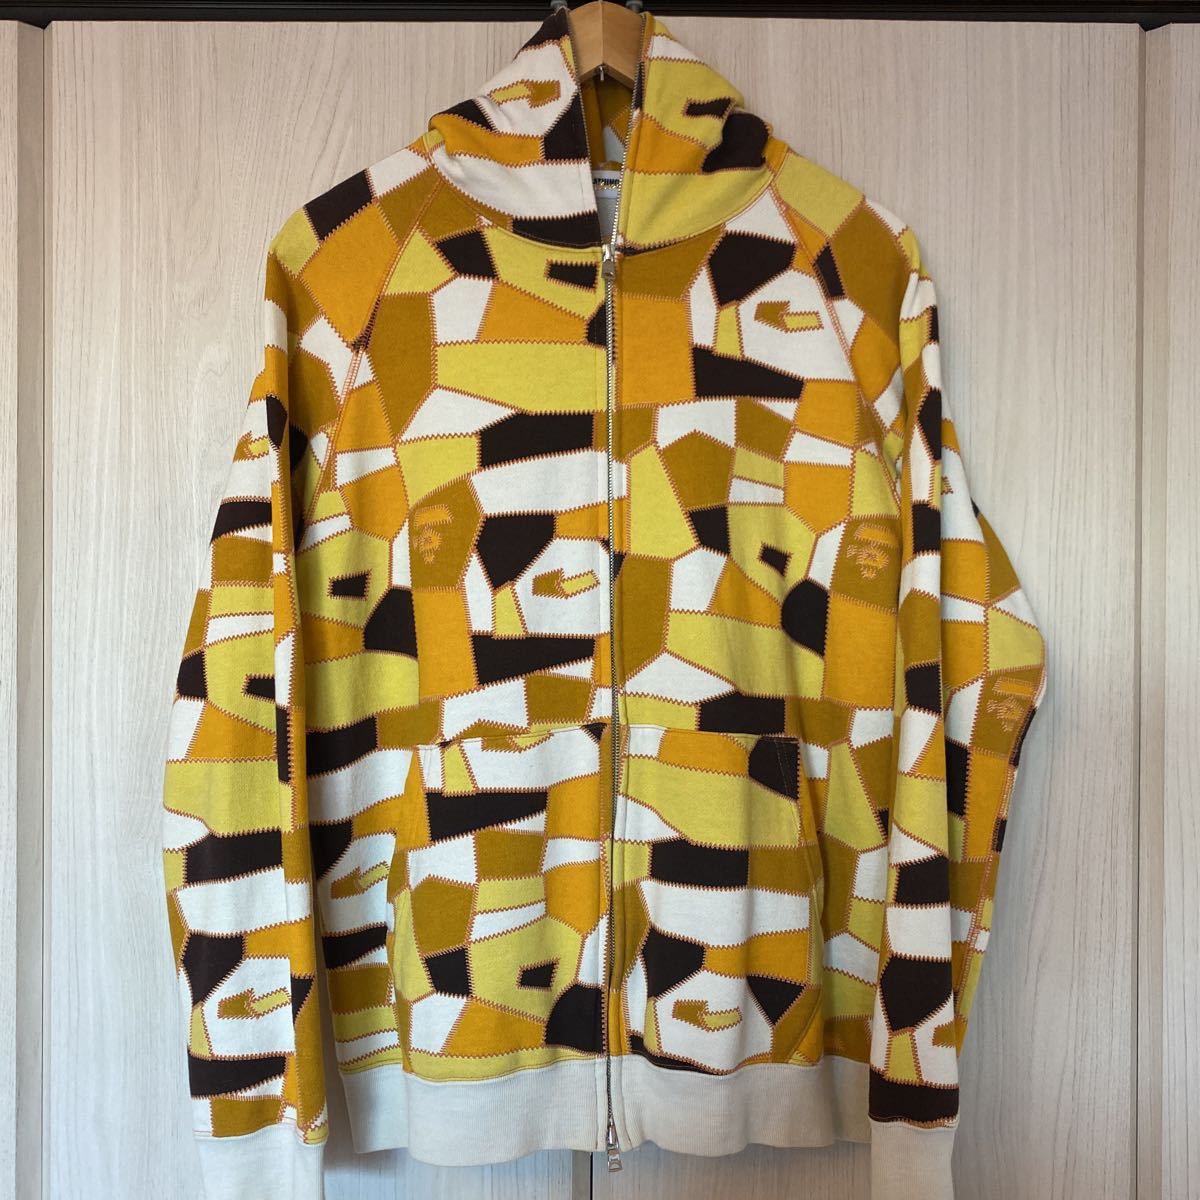 A Bathing Ape Classic Yellow multi-colored camo hoodie